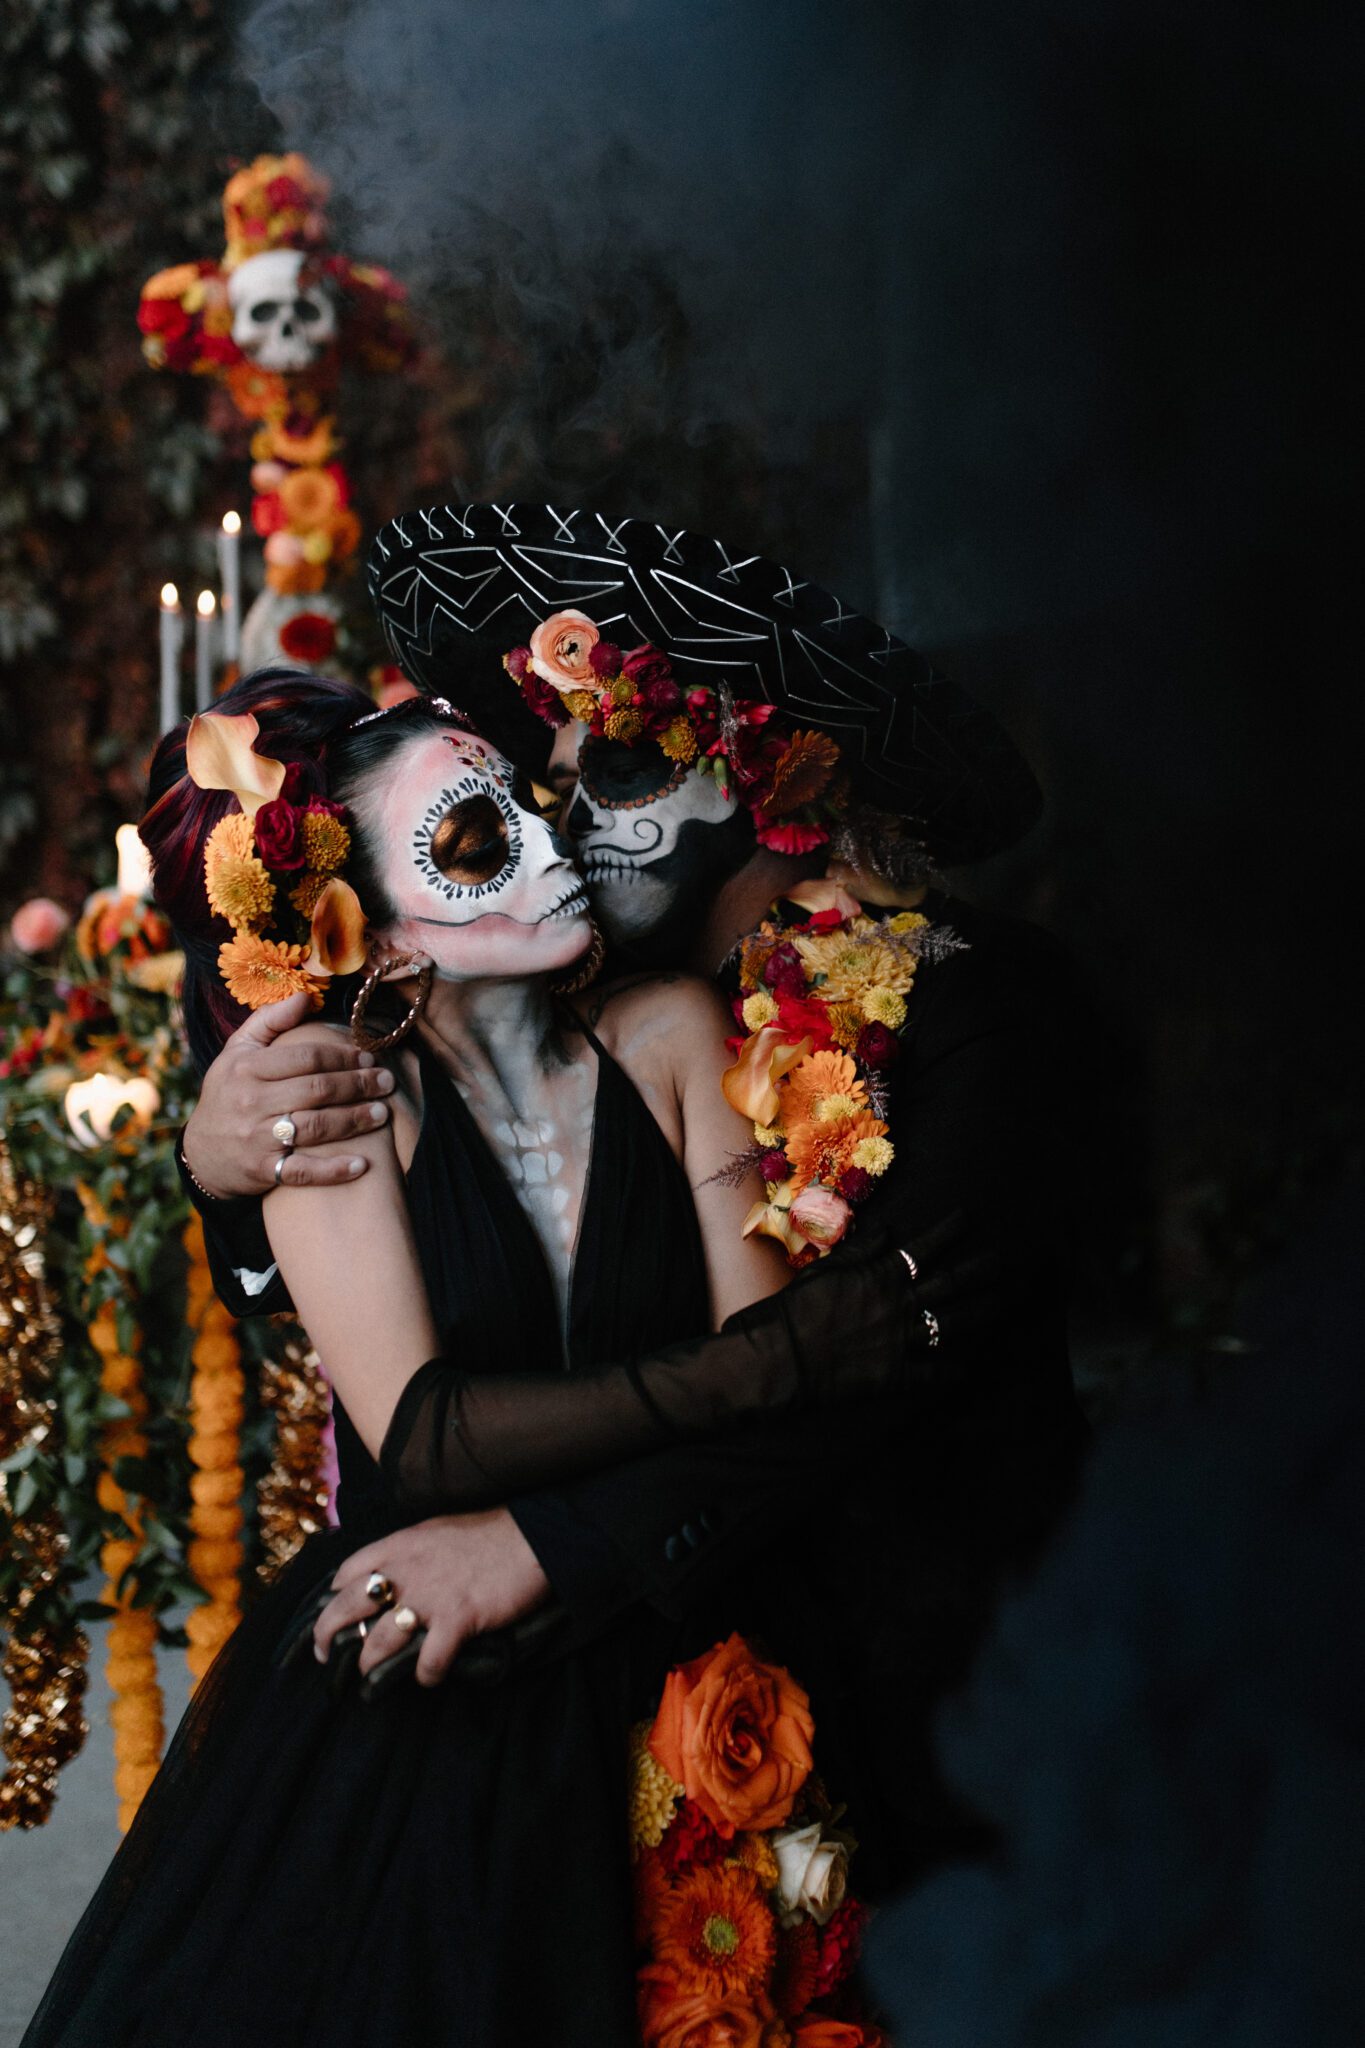 Black smoke bomb used during halloween inspired fall photo session, captured by Nikki Collette Photography and Inspired Motion Films.